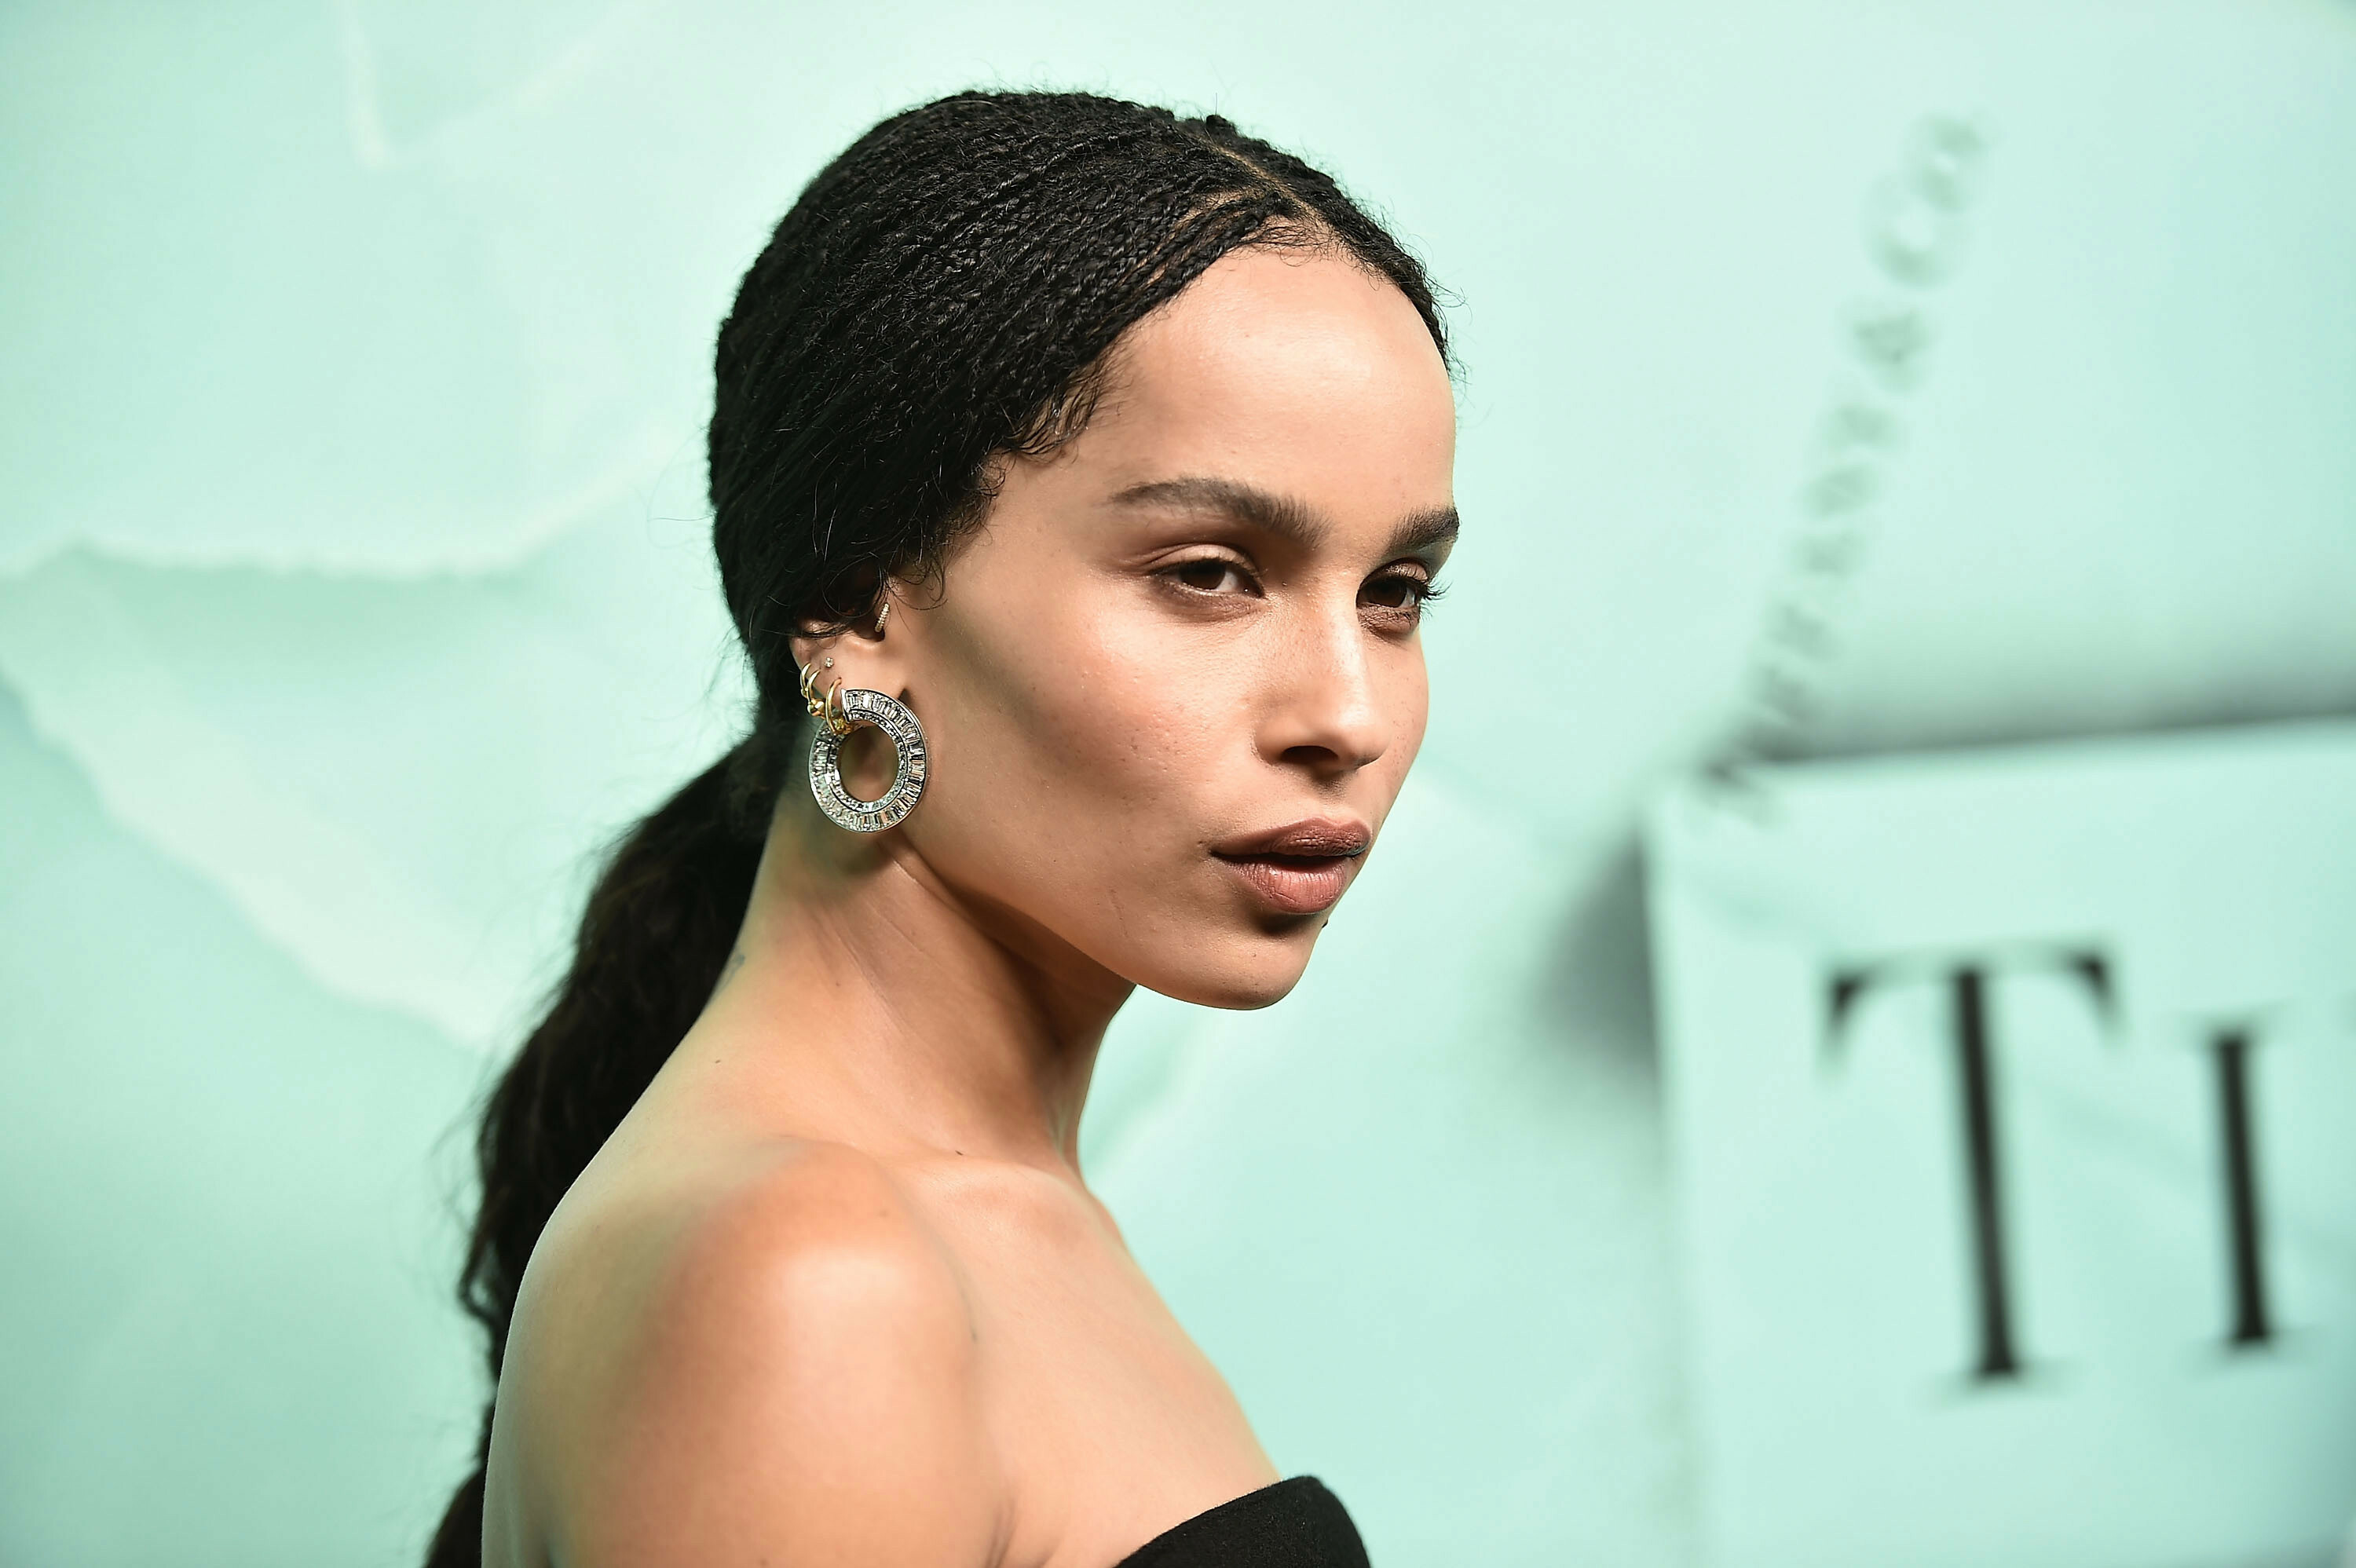 Zoe Kravitz: The daughter of Lenny Kravitz and Lisa Bonet, Movies Dope and Mad Max: Fury Road. 3000x2000 HD Wallpaper.